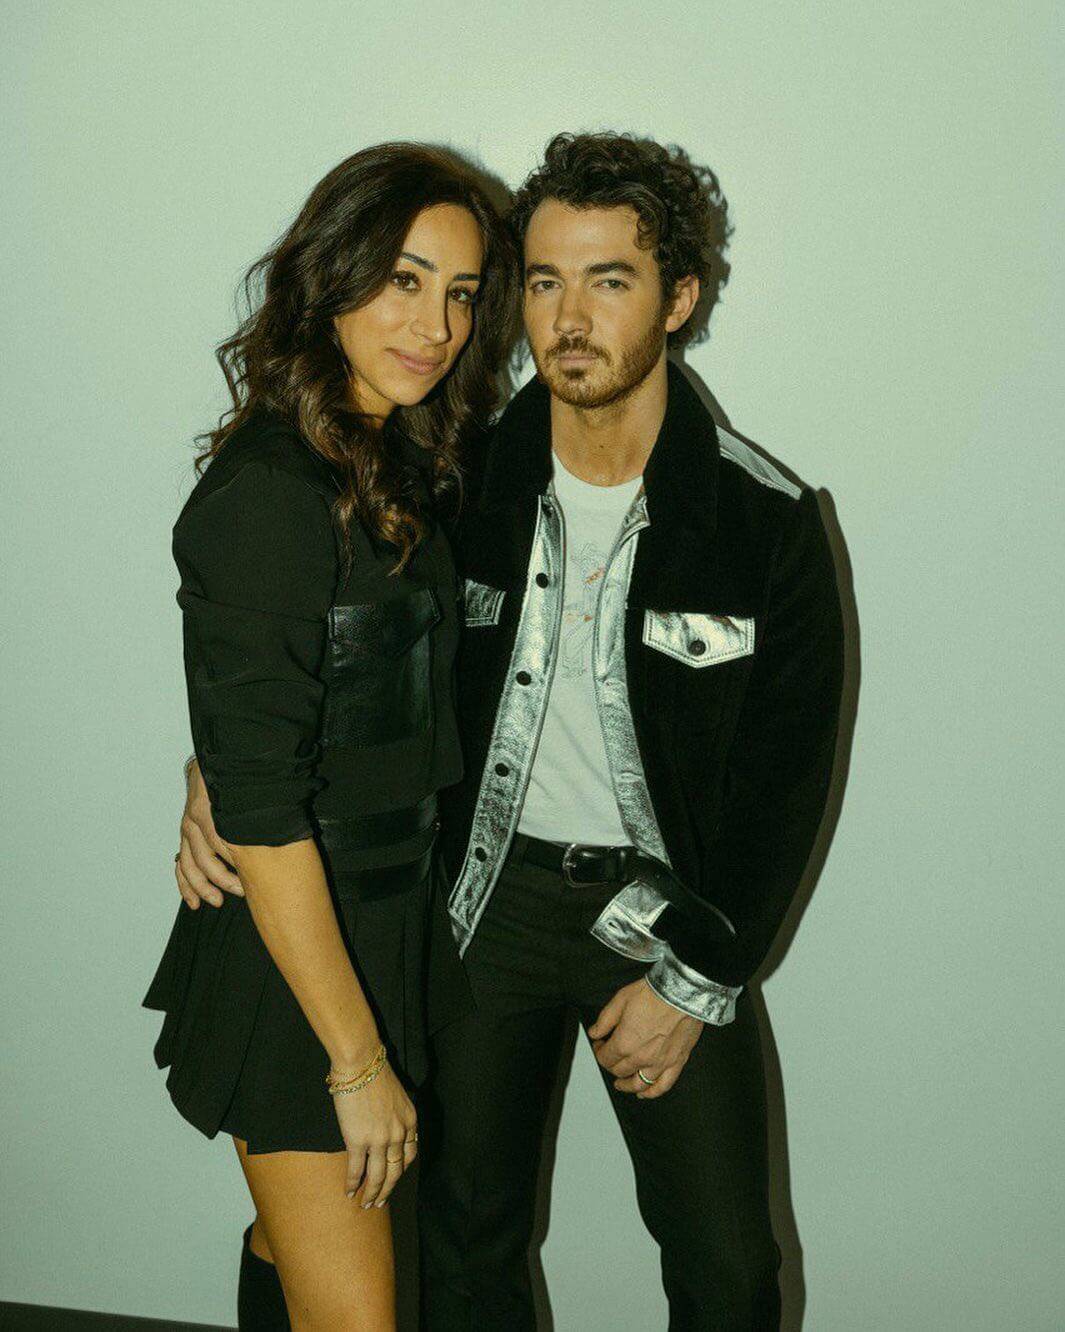 Kevin Jonas - Family And Relationships